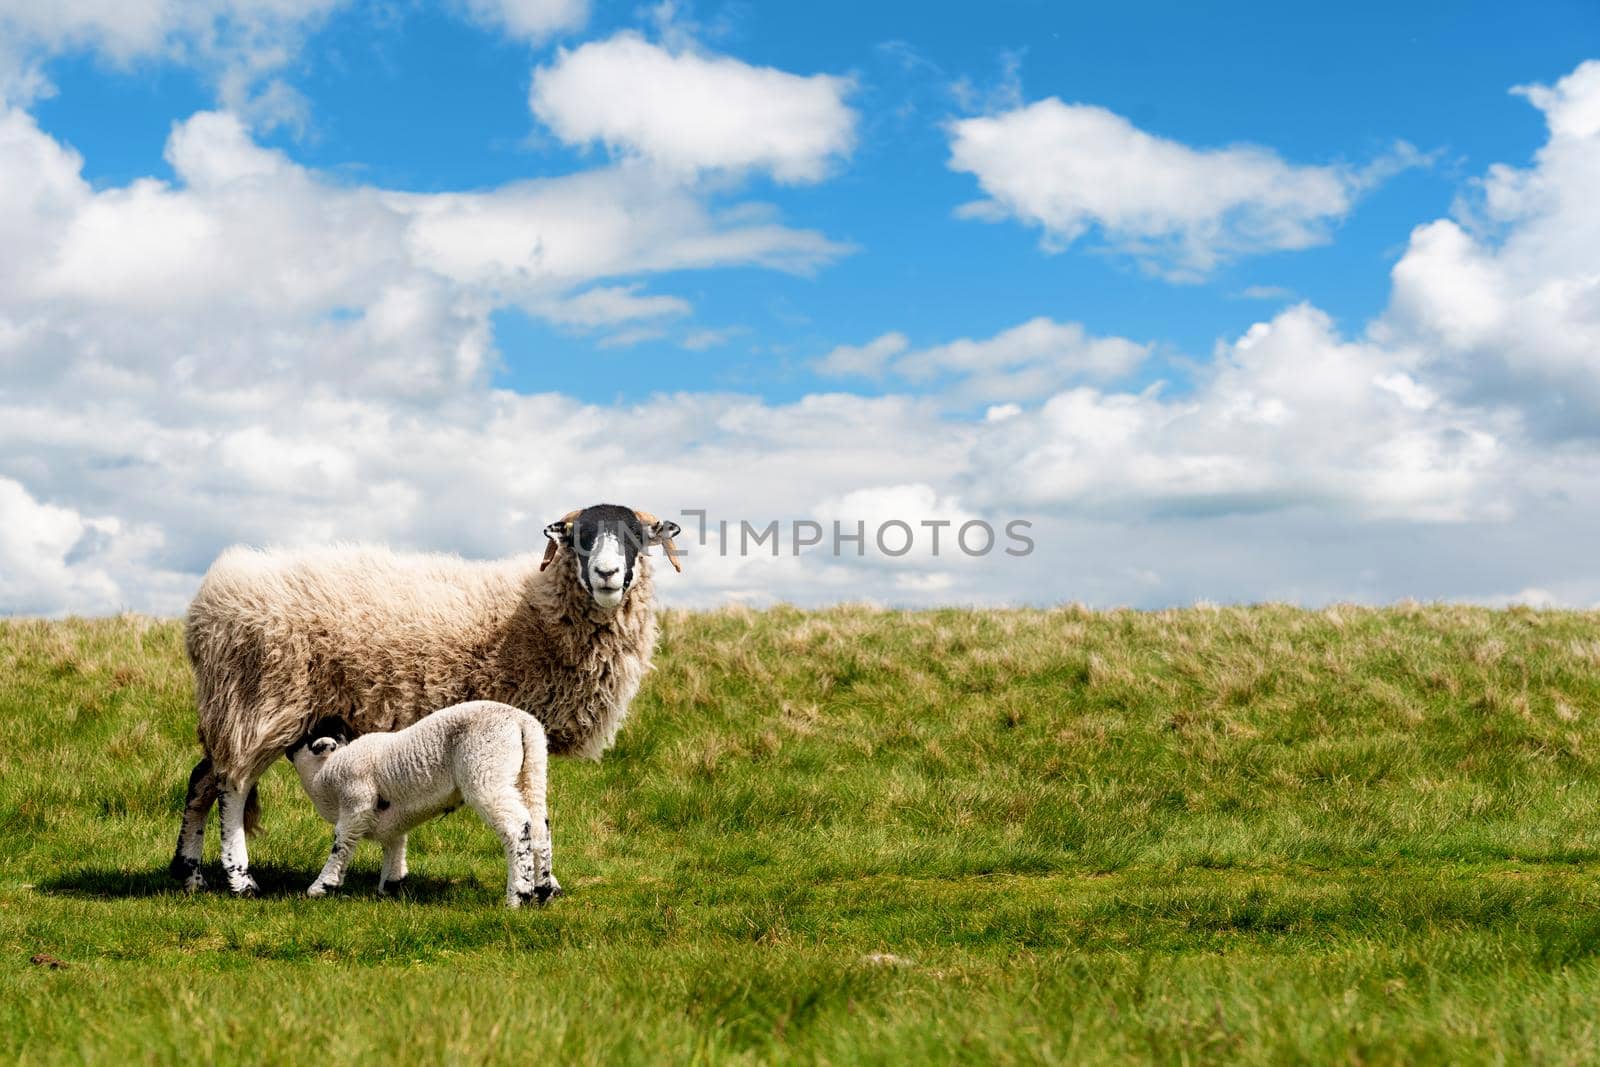 The grazing sheep and lamb on the meadow in Peak District against the blue sky